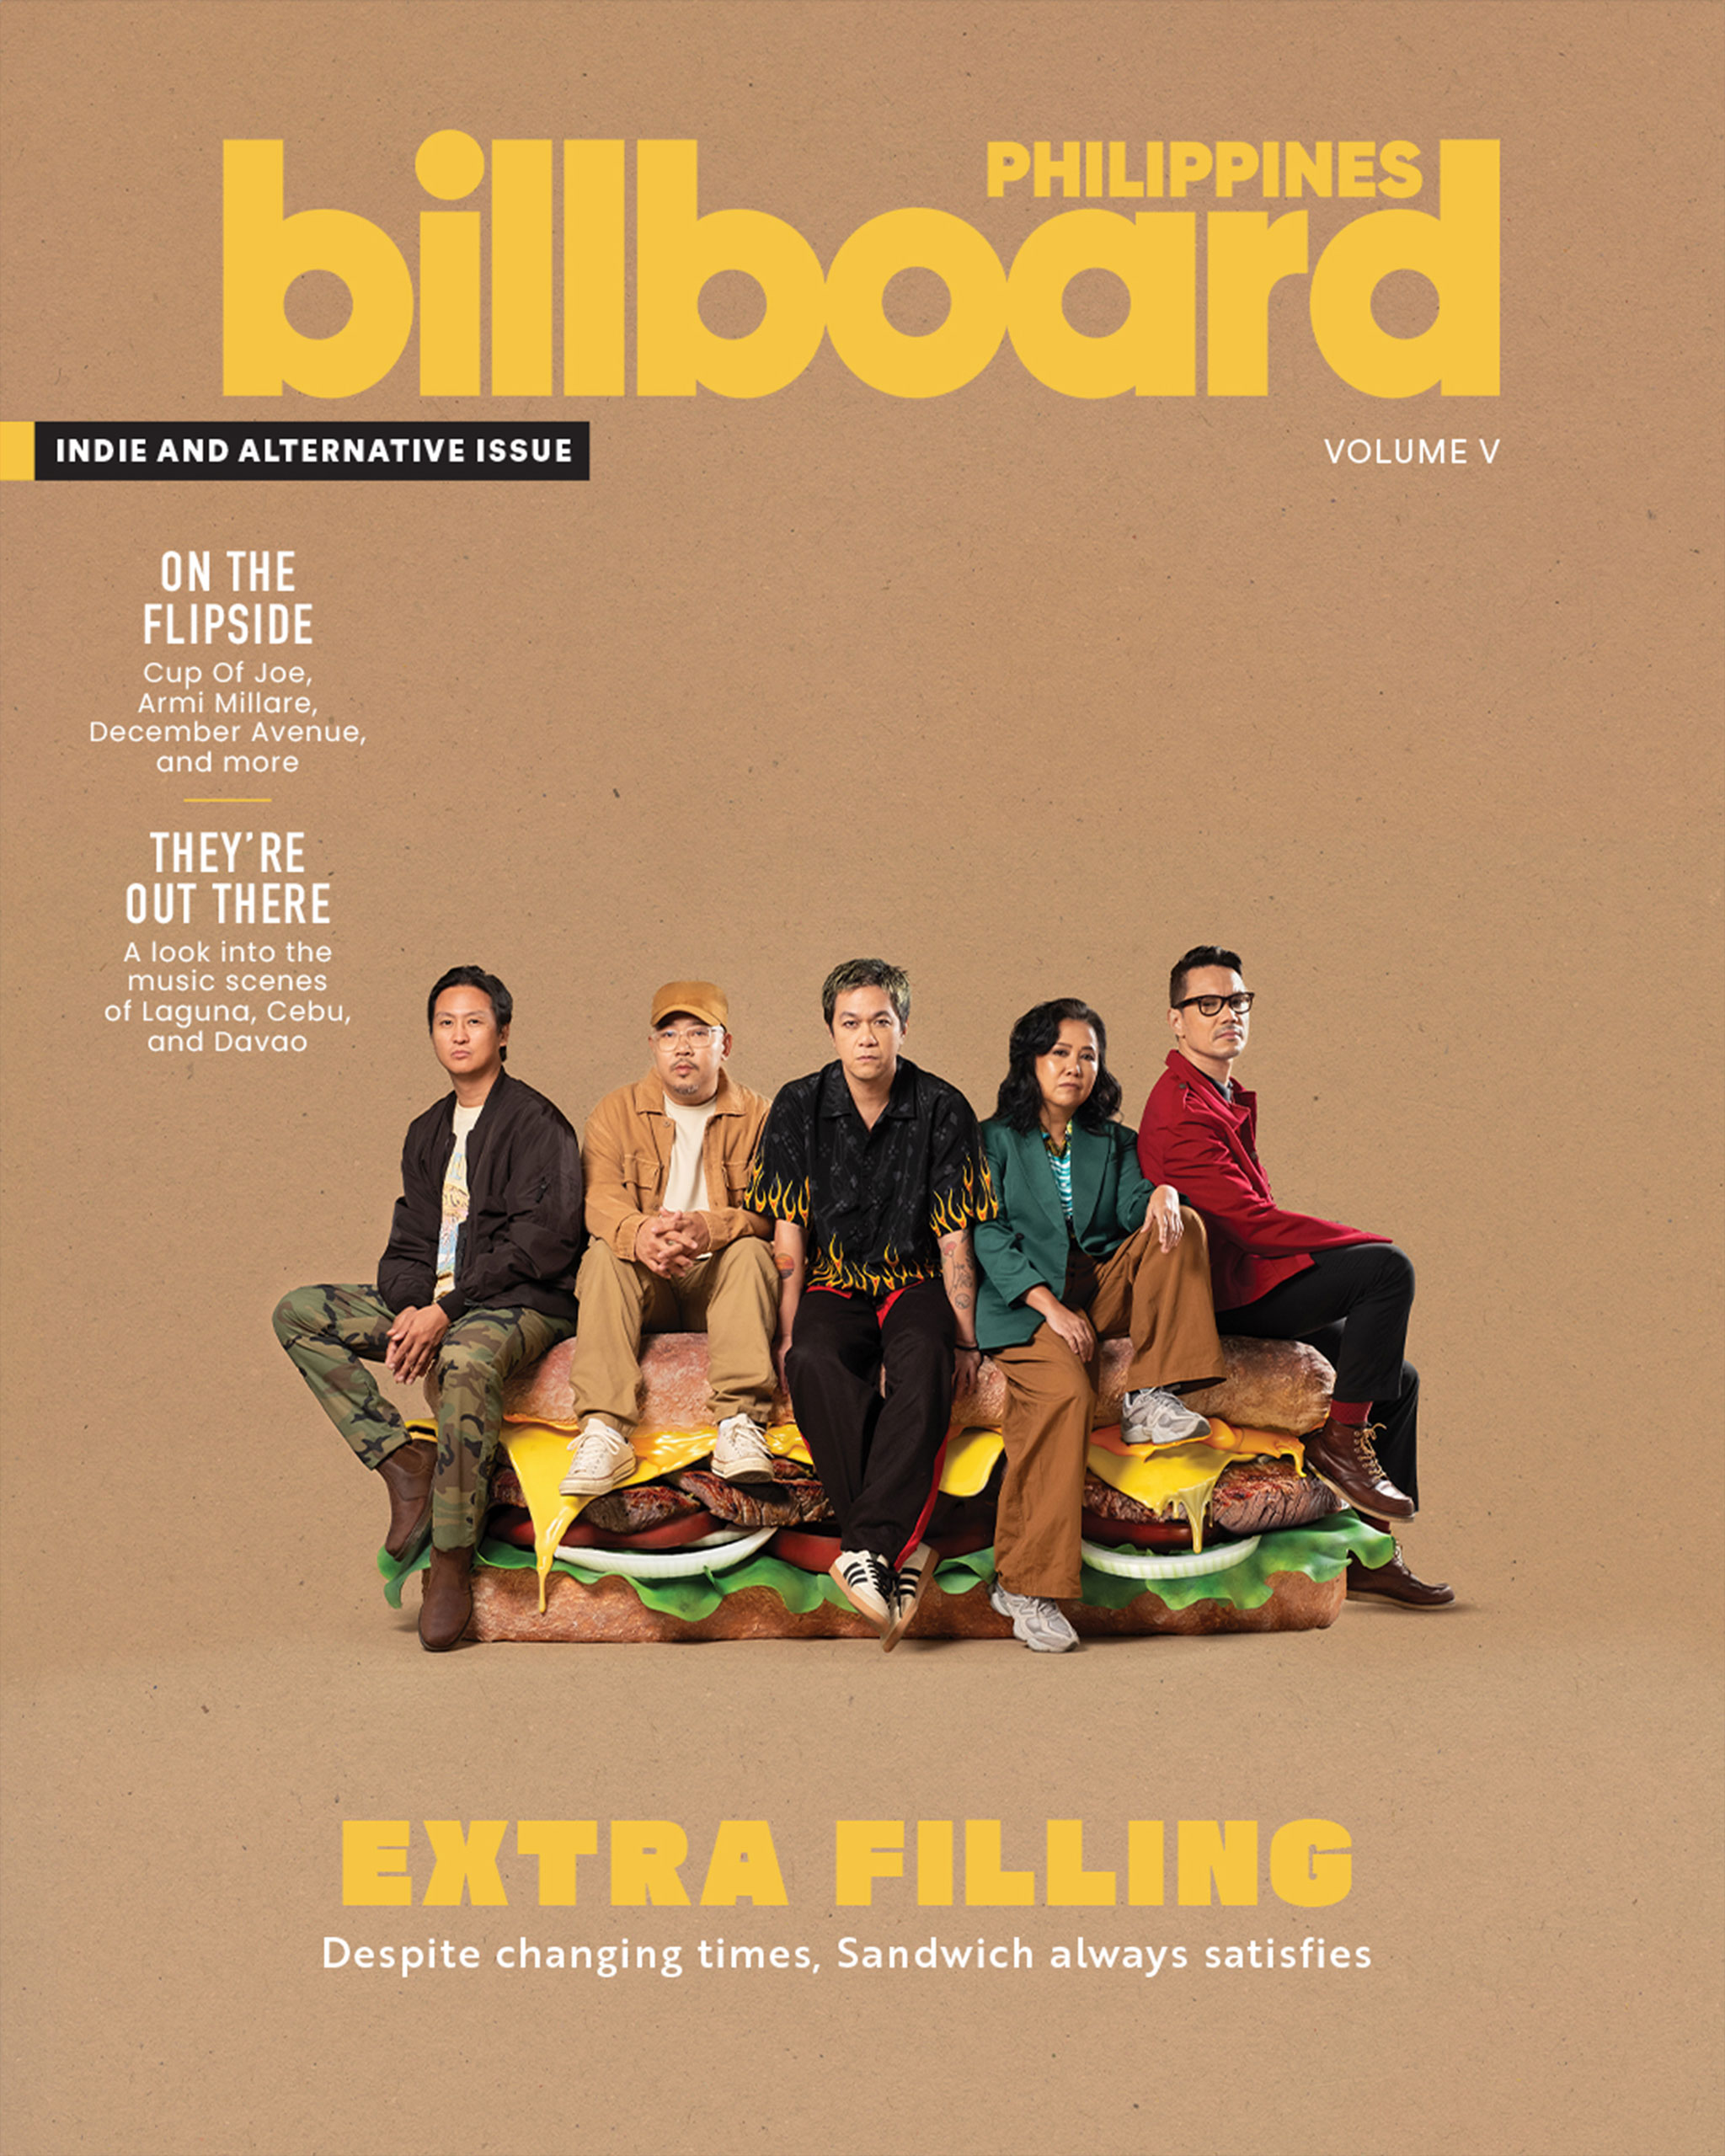 Sandwich as the cover stars of the Billboard Philippines Indie and Alternative Issue